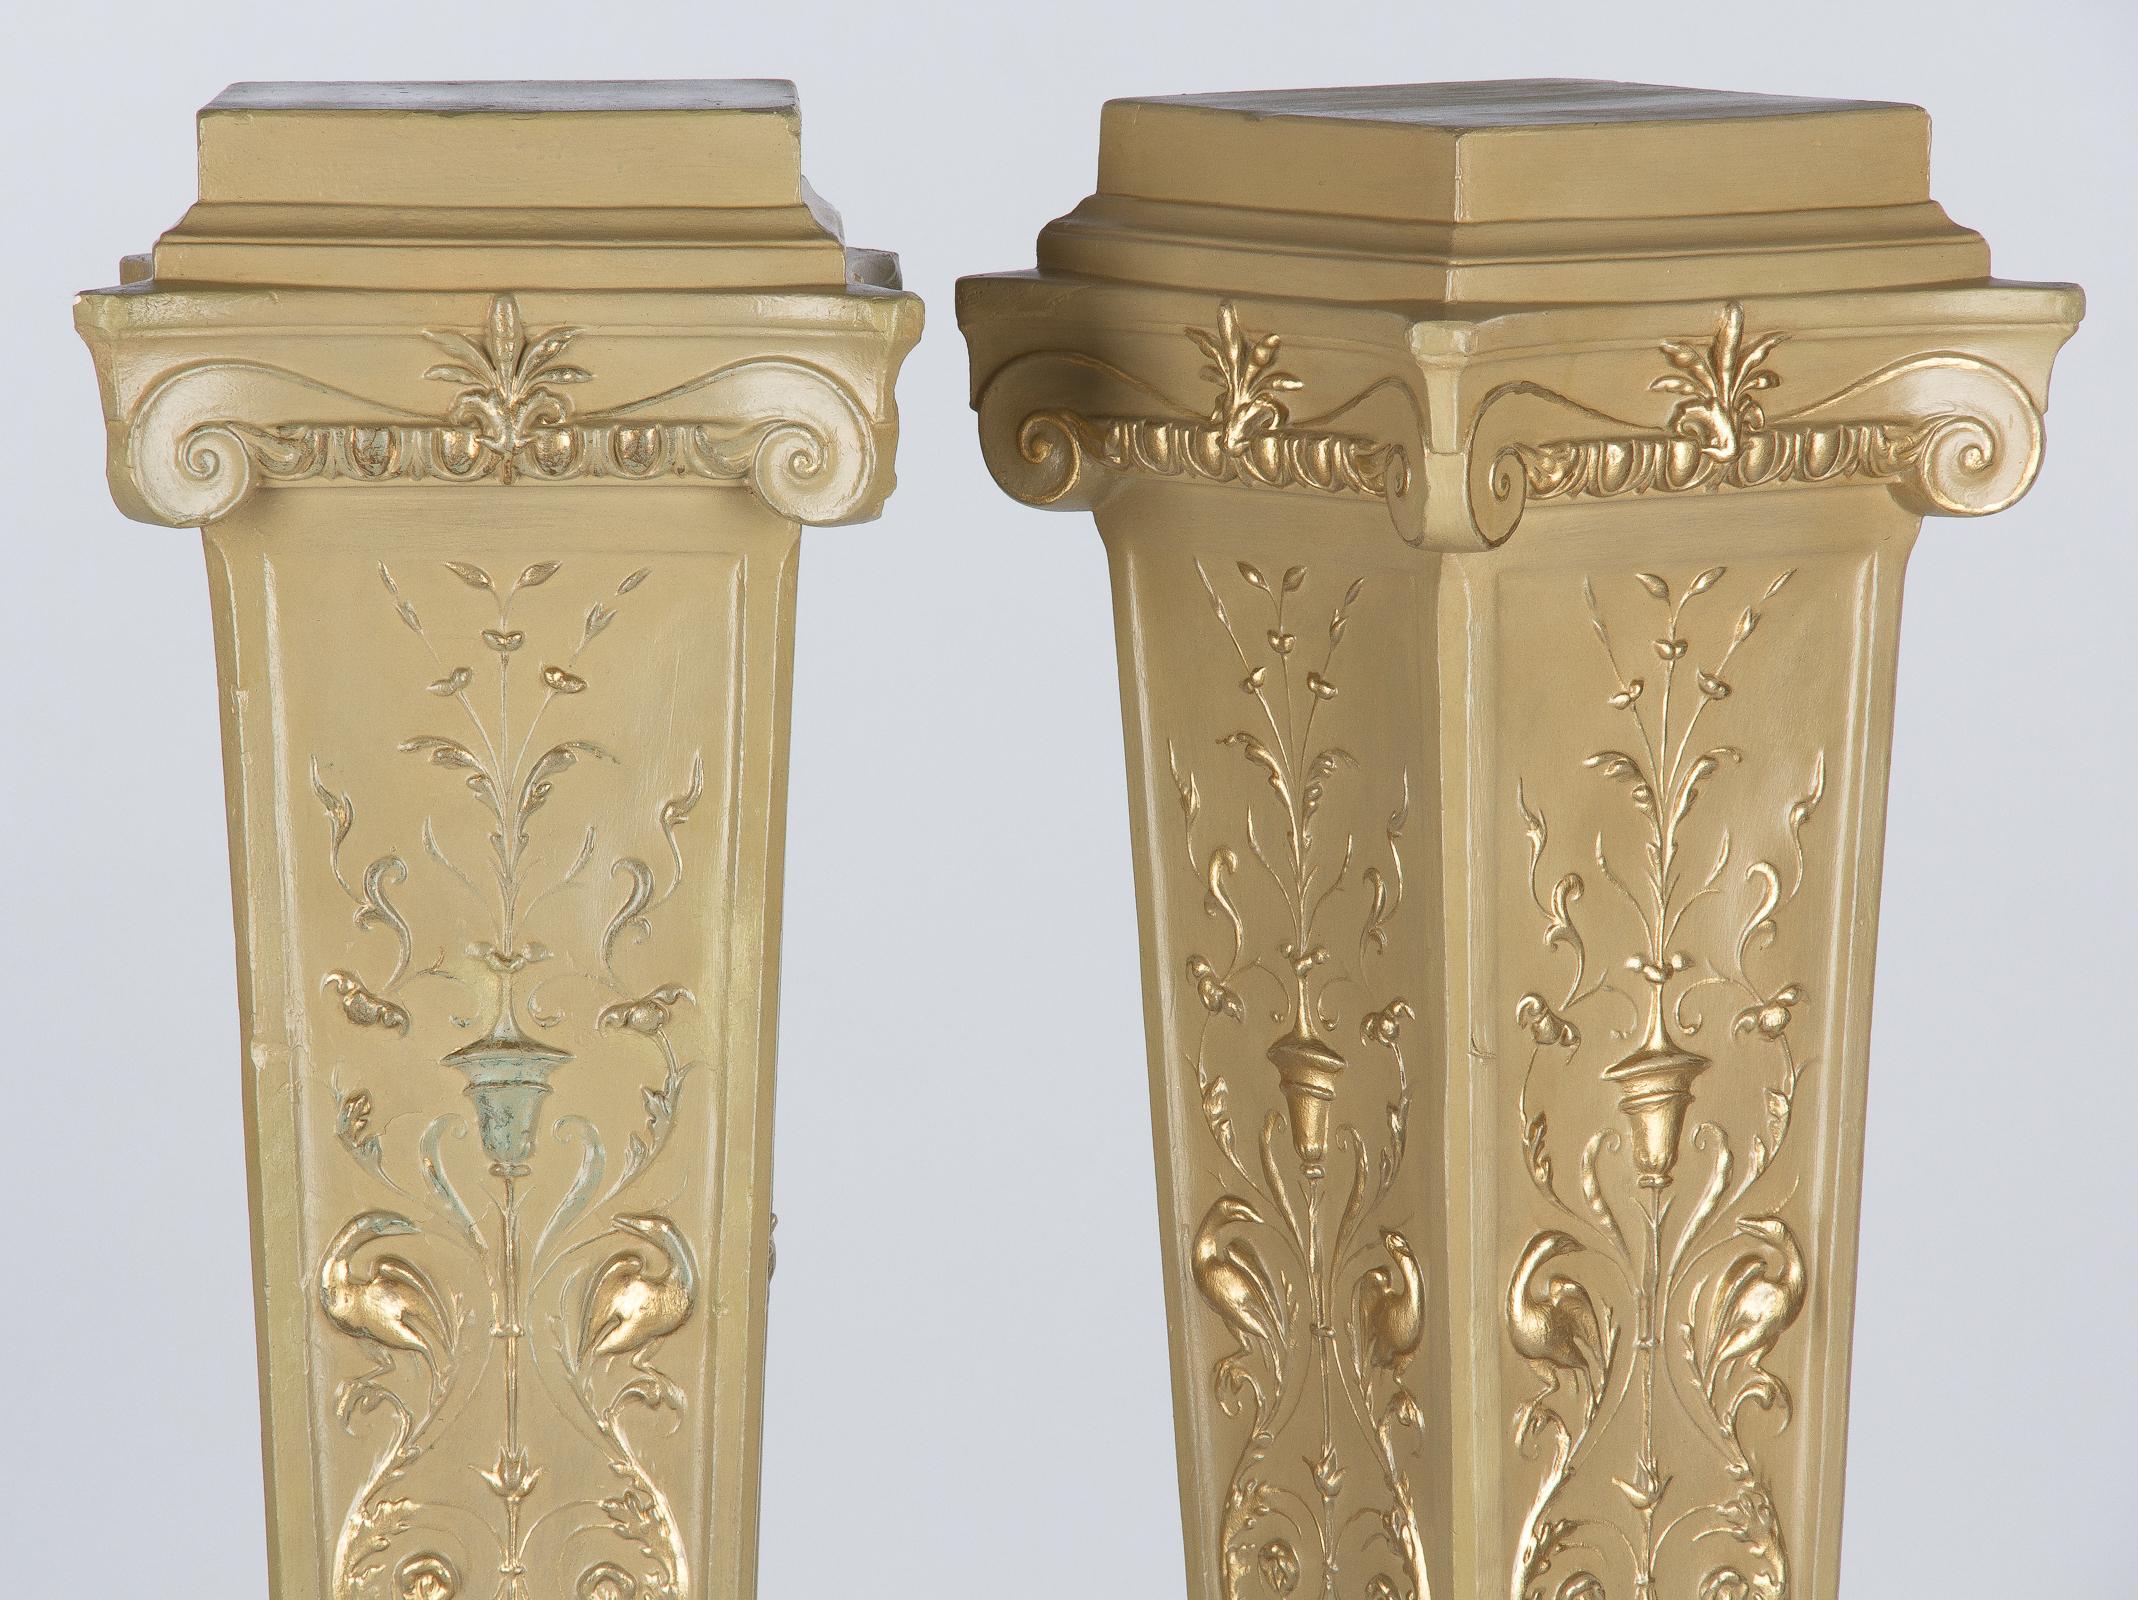 French Neoclassical Painted Plaster Pedestals, 1940s For Sale 9